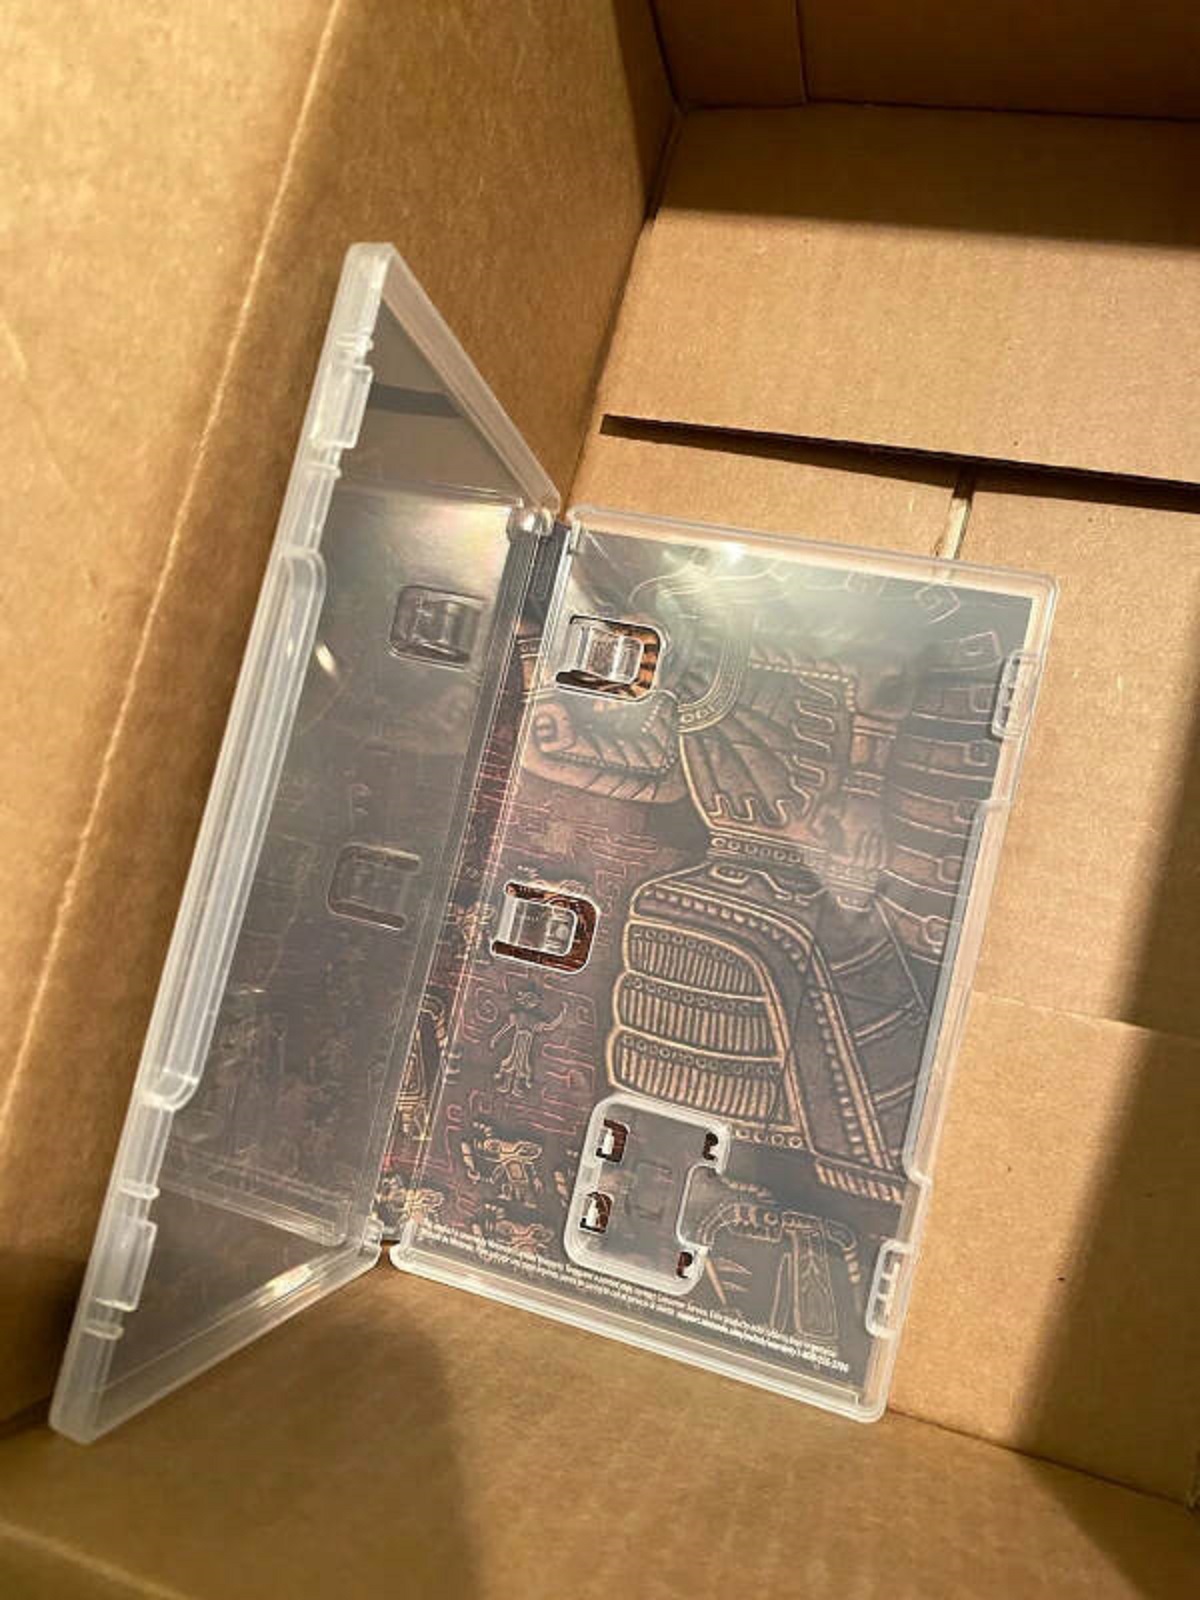 “Received an empty Zelda case from target.”